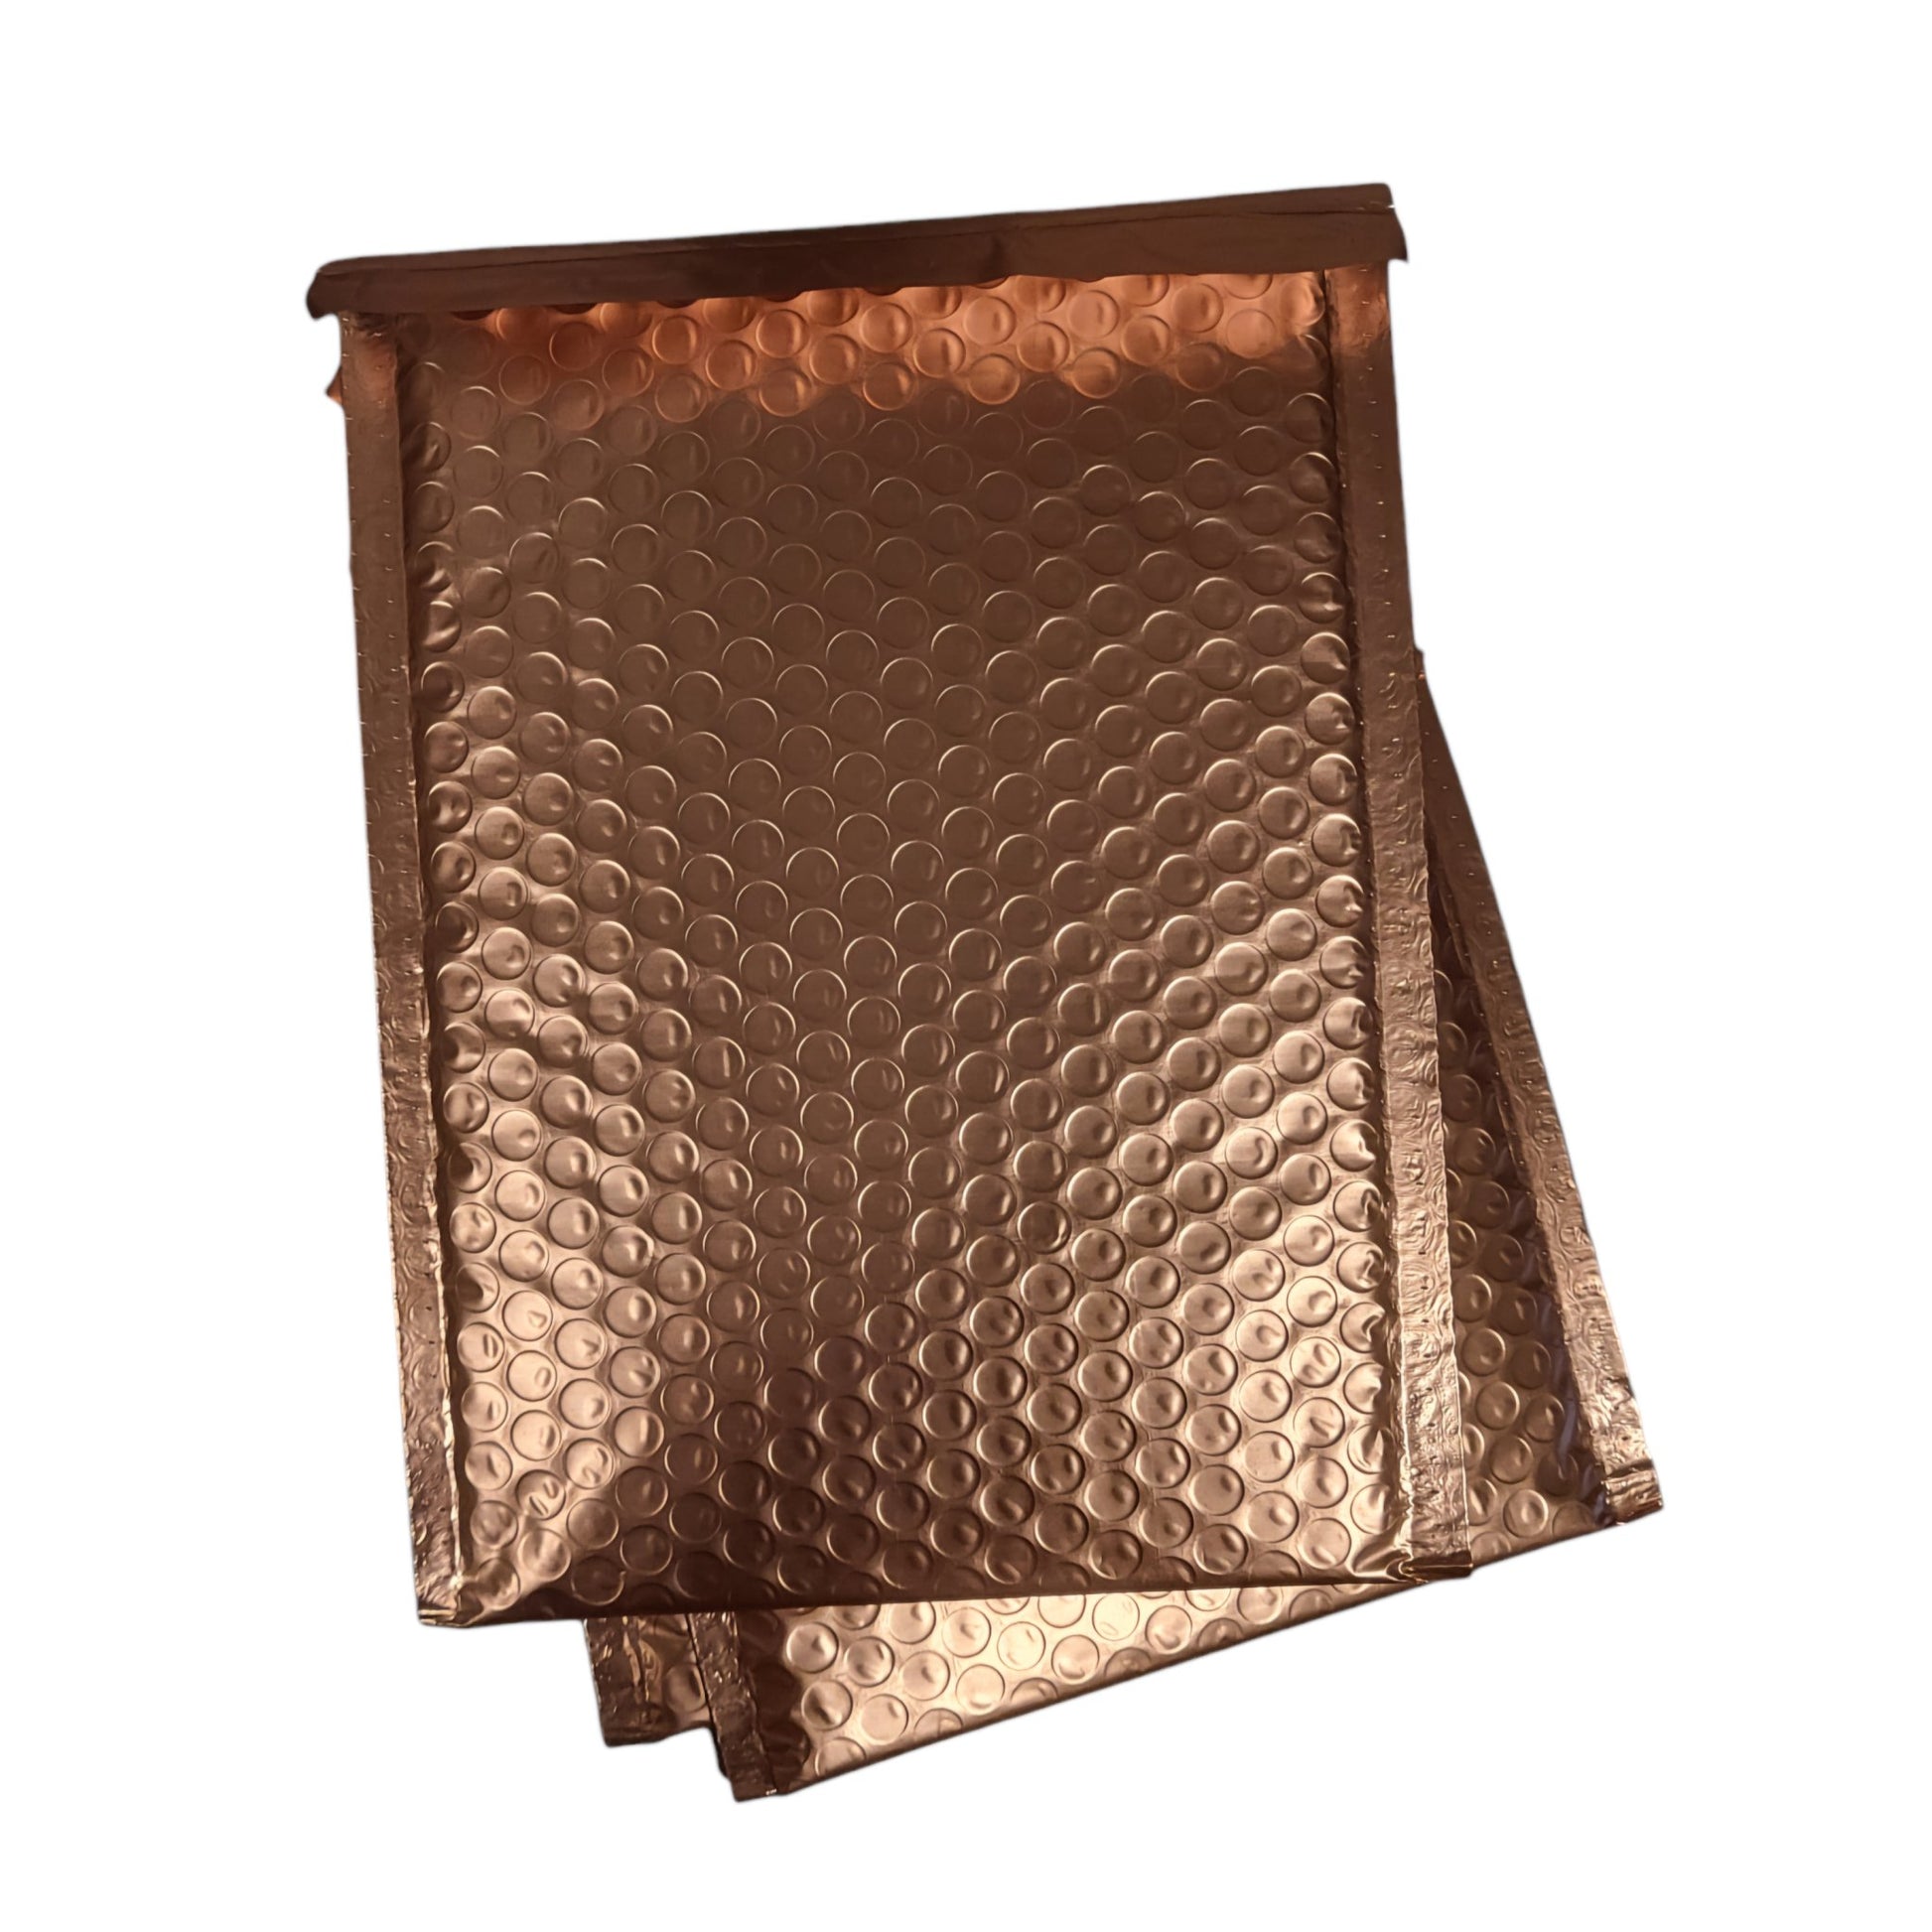 Rose Gold Metallic Bubble Mailers Size 4x8 Padded Shipping Bags - Shipping In Style